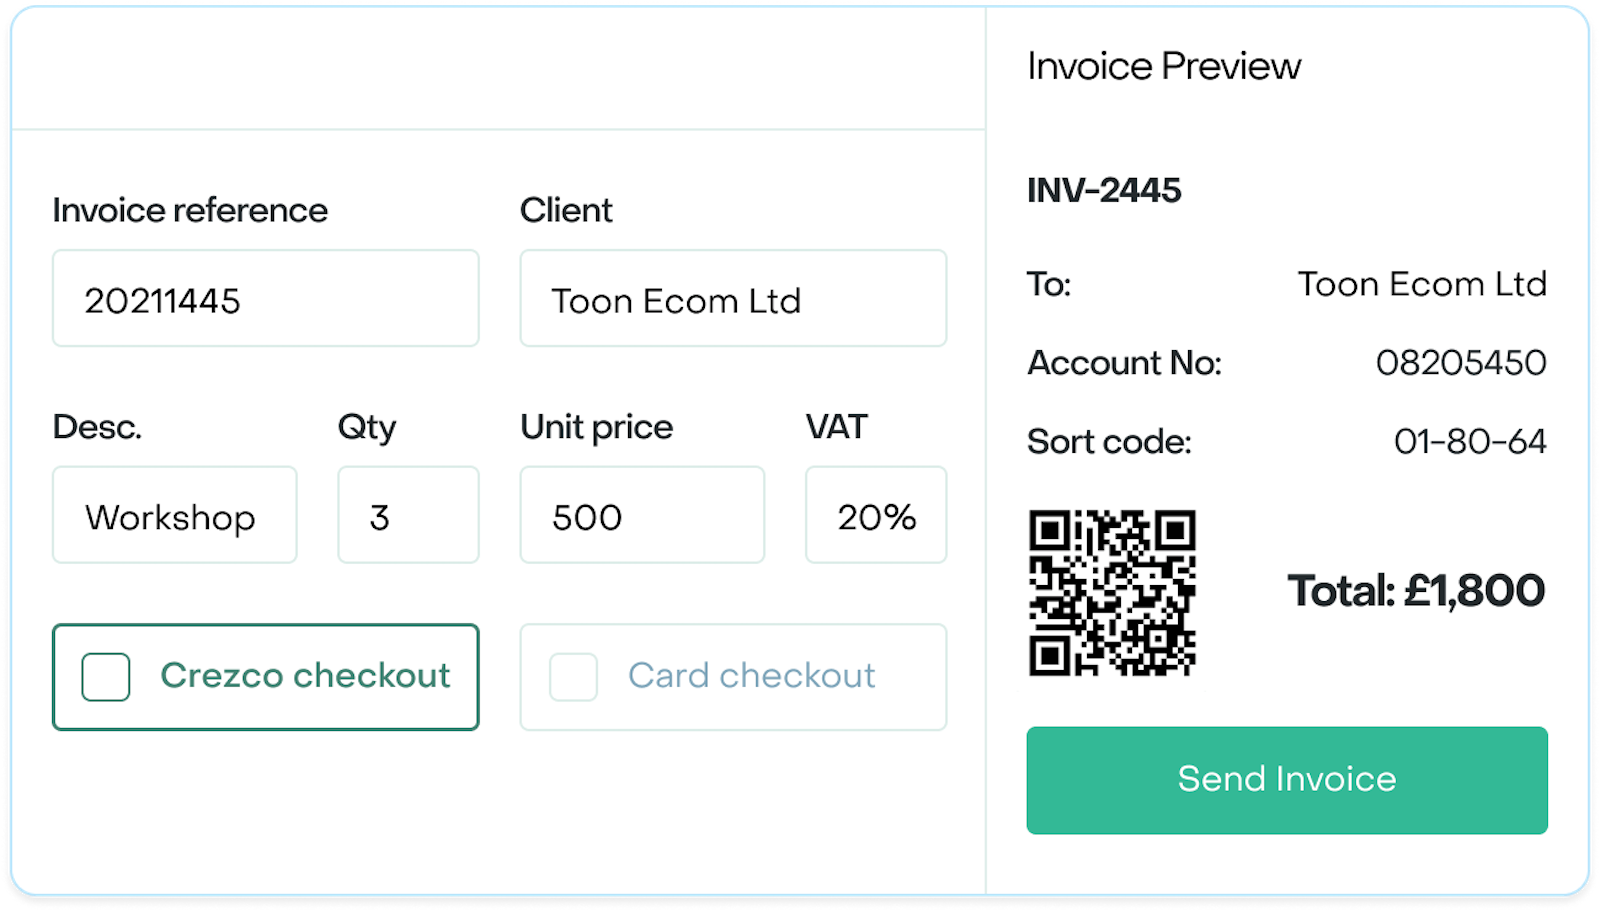 Invoice with Crezco checkout